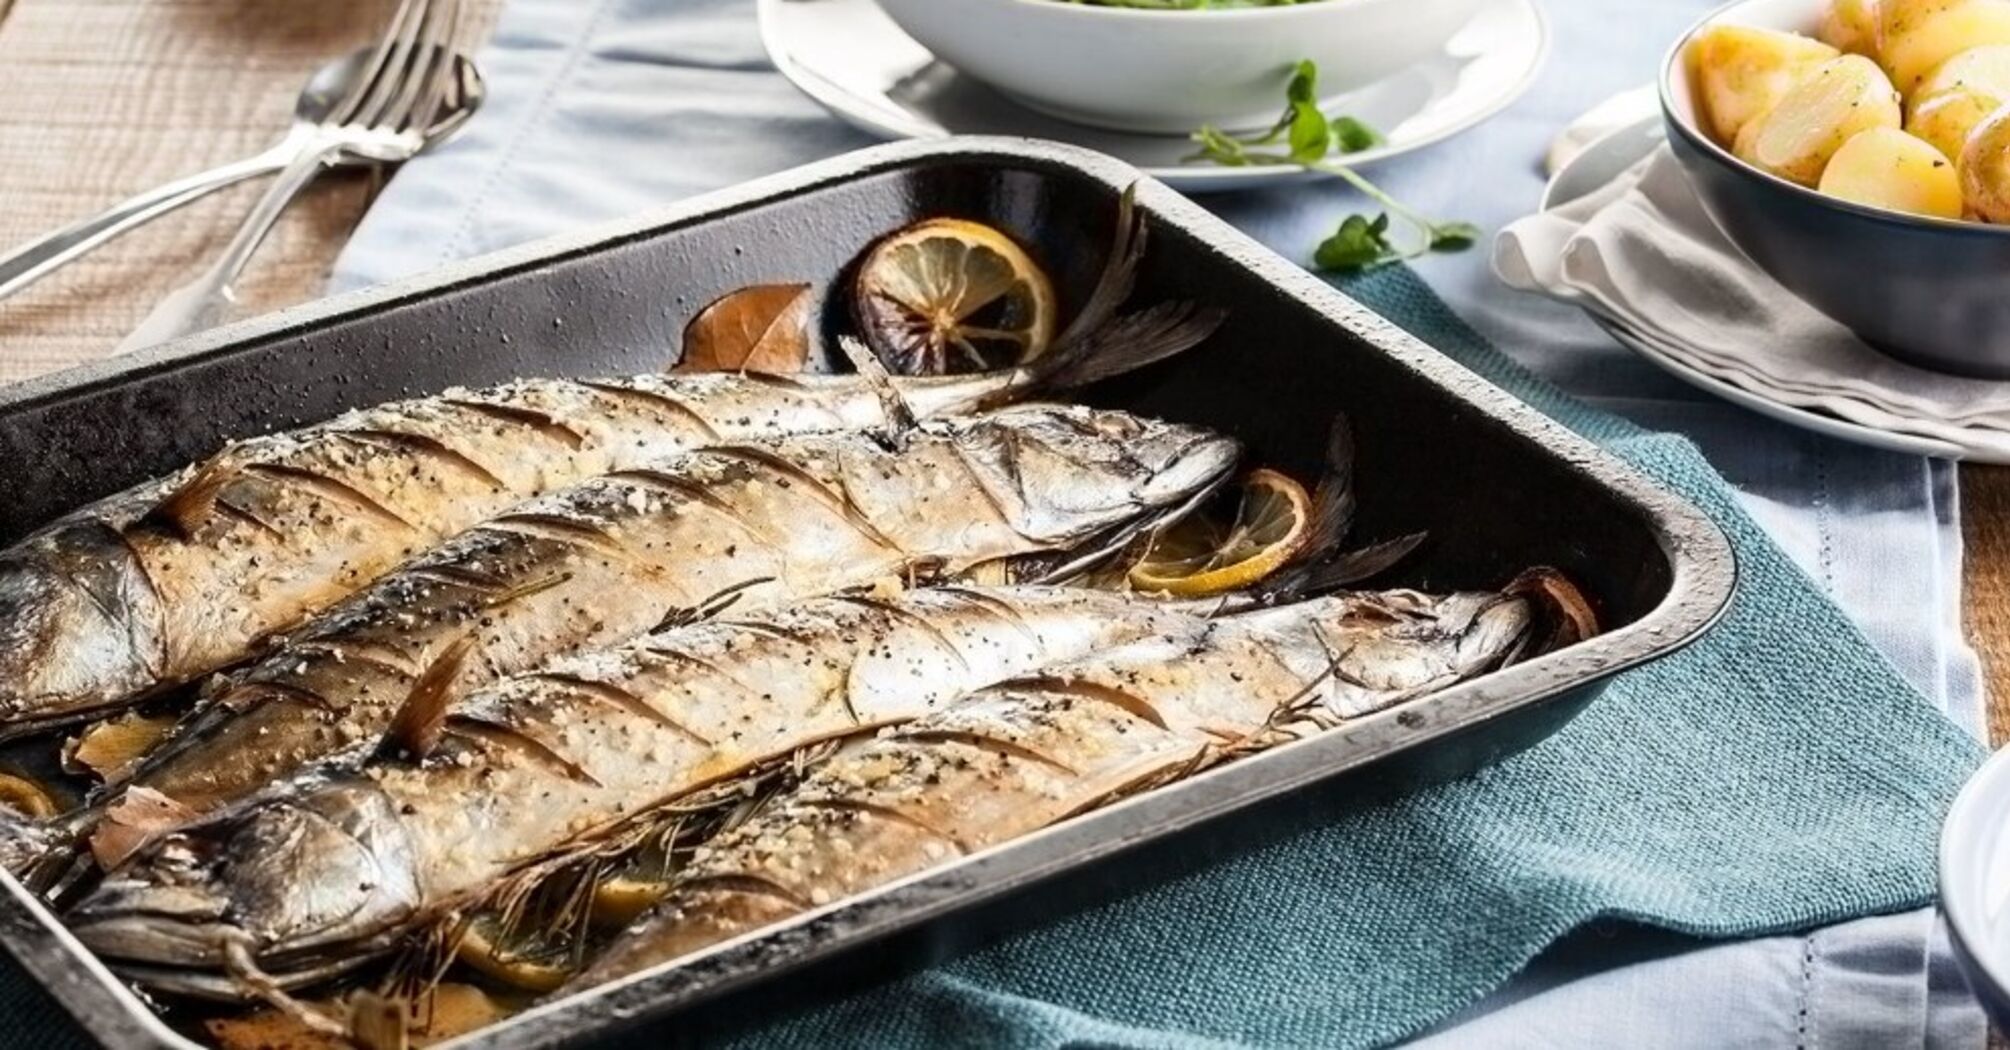 How to bake mackerel deliciously: five simple and budget-friendly recipes